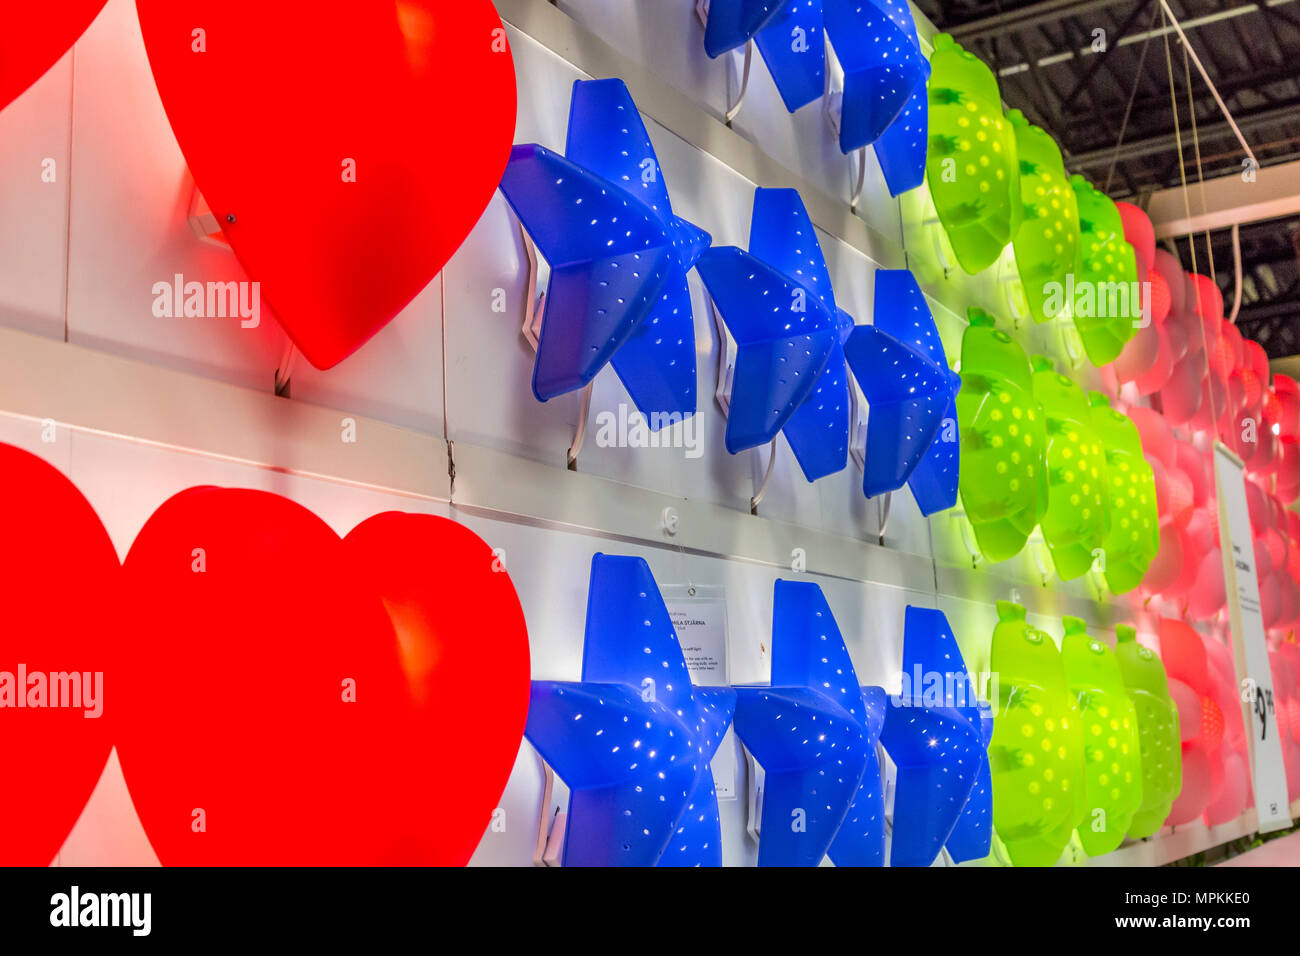 Bright colorful wall lamps for sale inside an Ikea store in the US Stock Photo